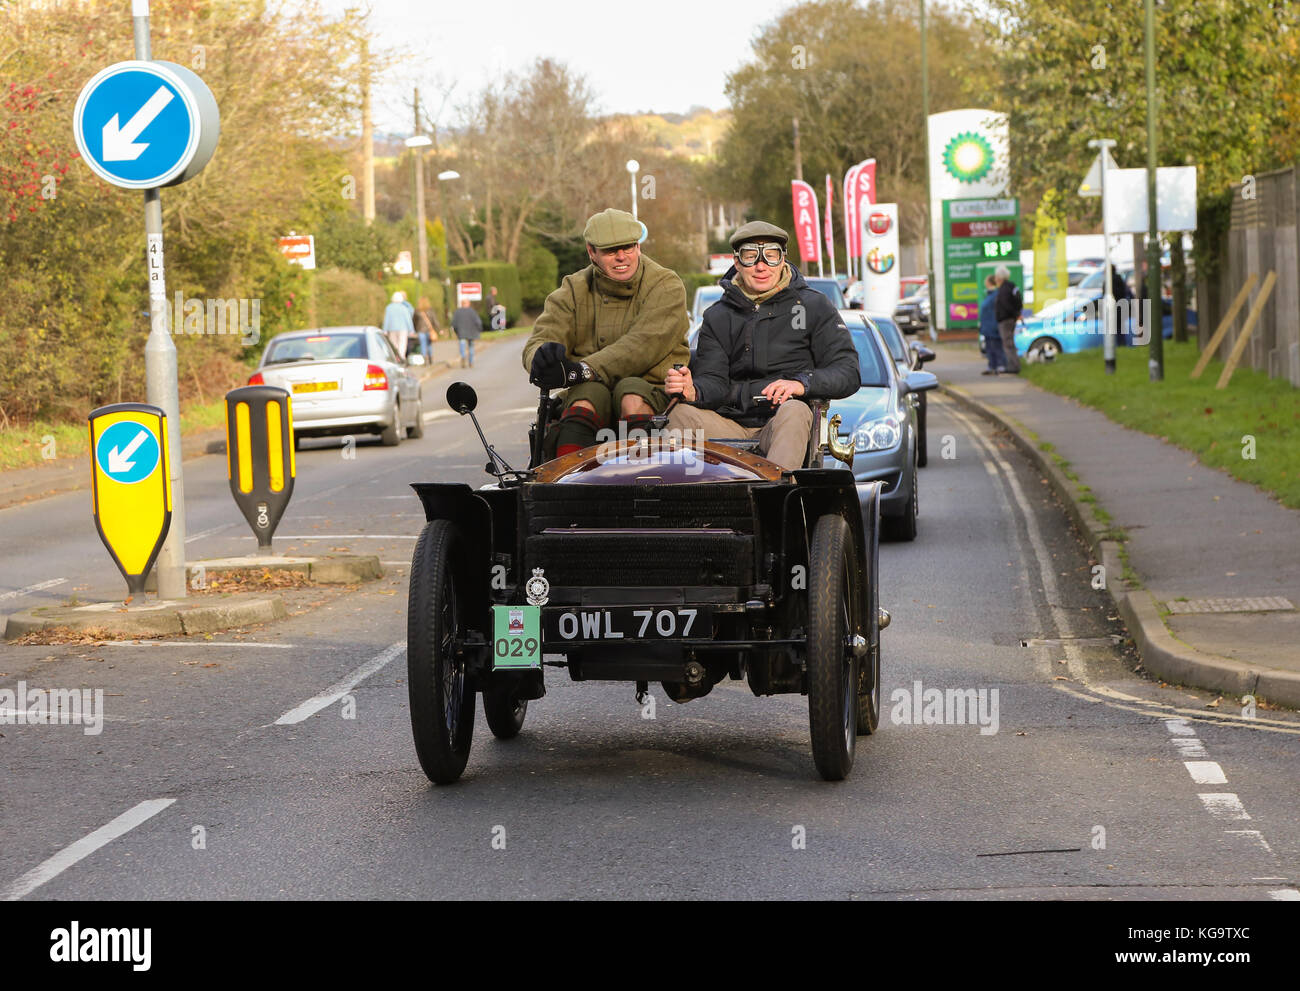 London, UK. 5th Nov, 2017. 1899 Wolseley competes in the London to Brighton Vintage Car Rally 2017. Credit: Richard avis/Alamy Live News Stock Photo